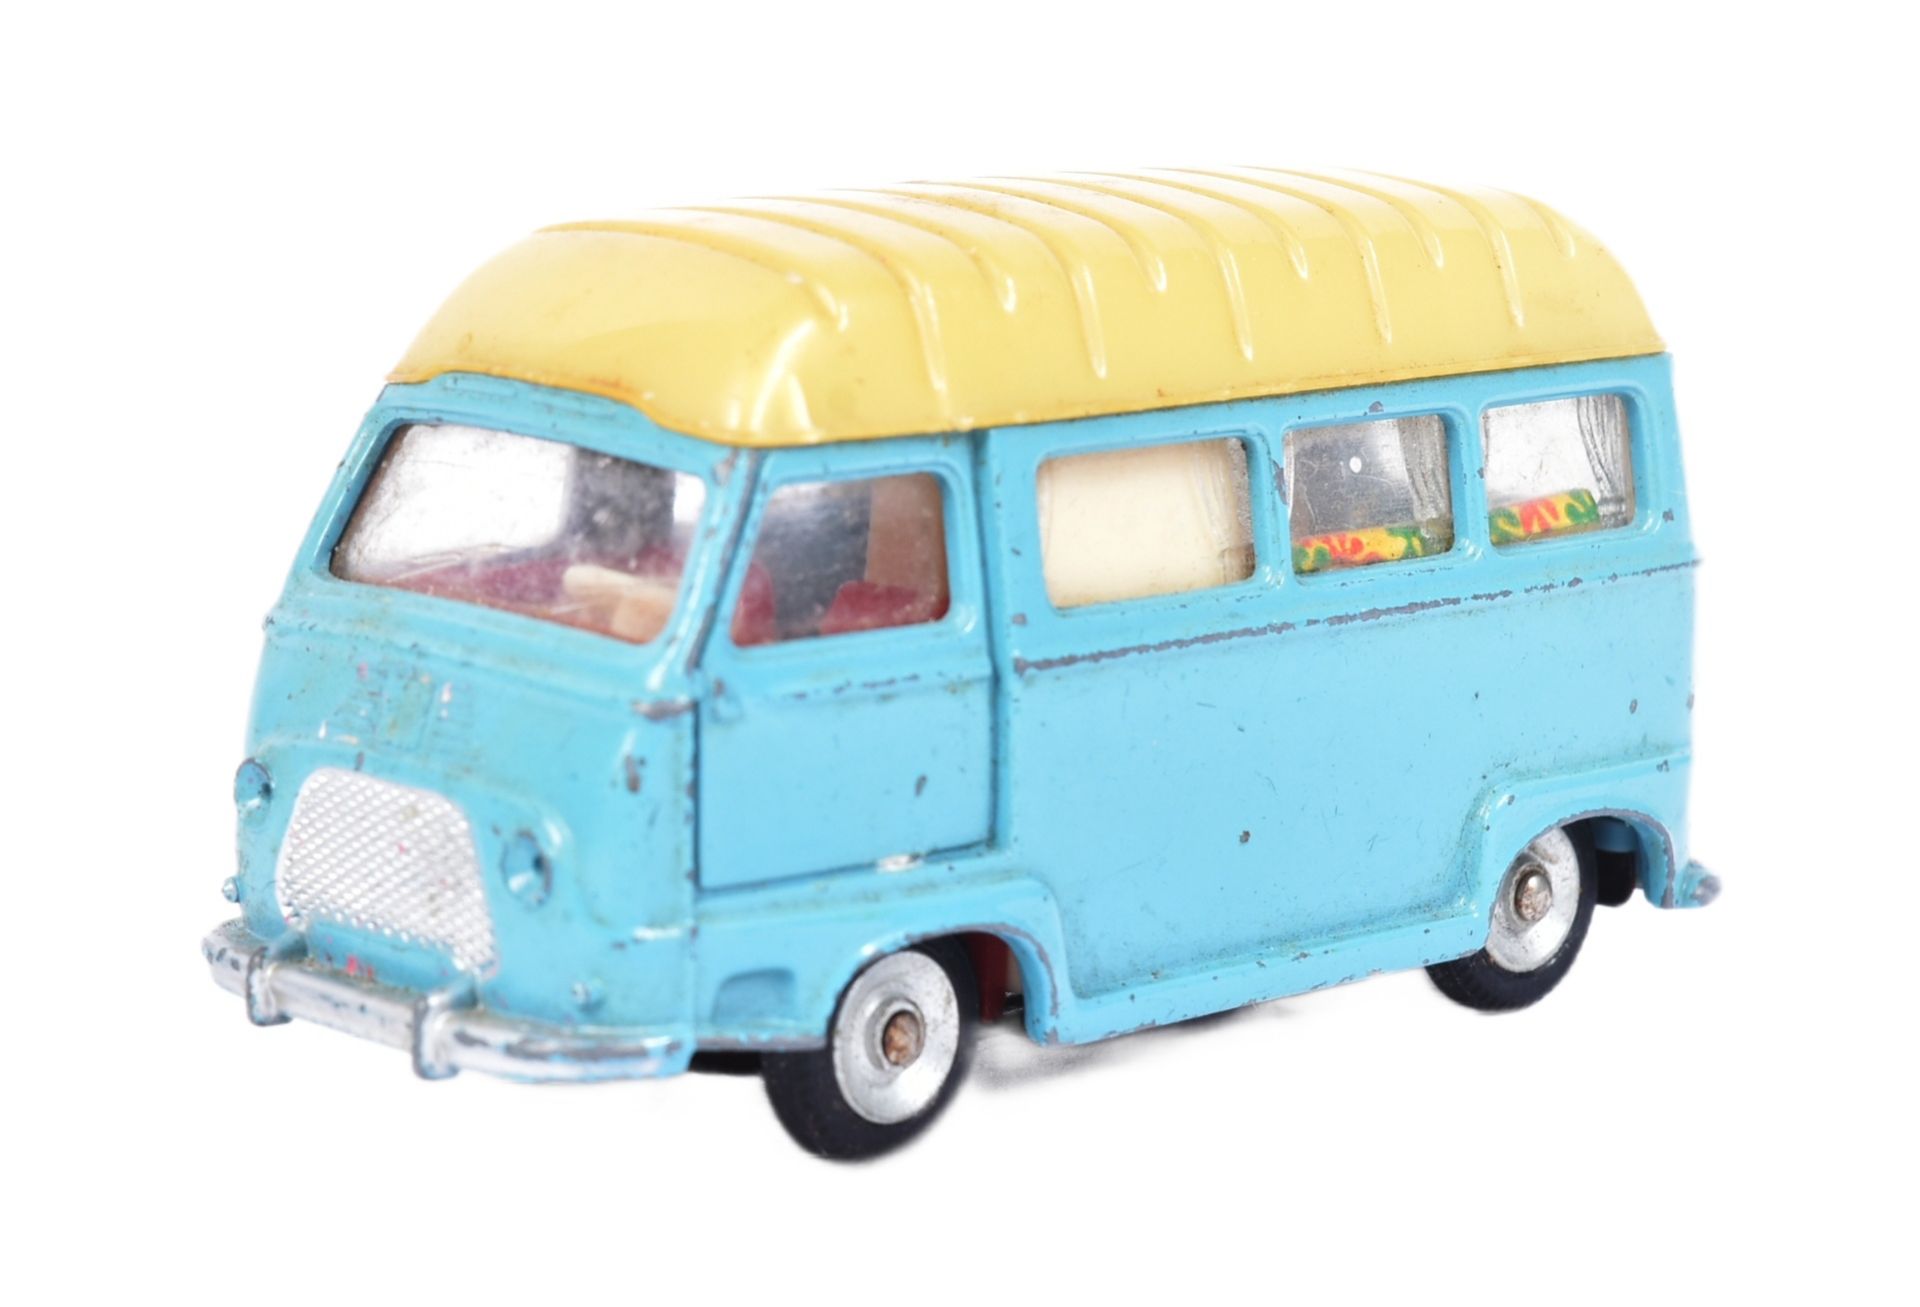 DIECAST - VINTAGE FRENCH MADE DINKY TOYS - RENAULT CAMPER - Image 2 of 4